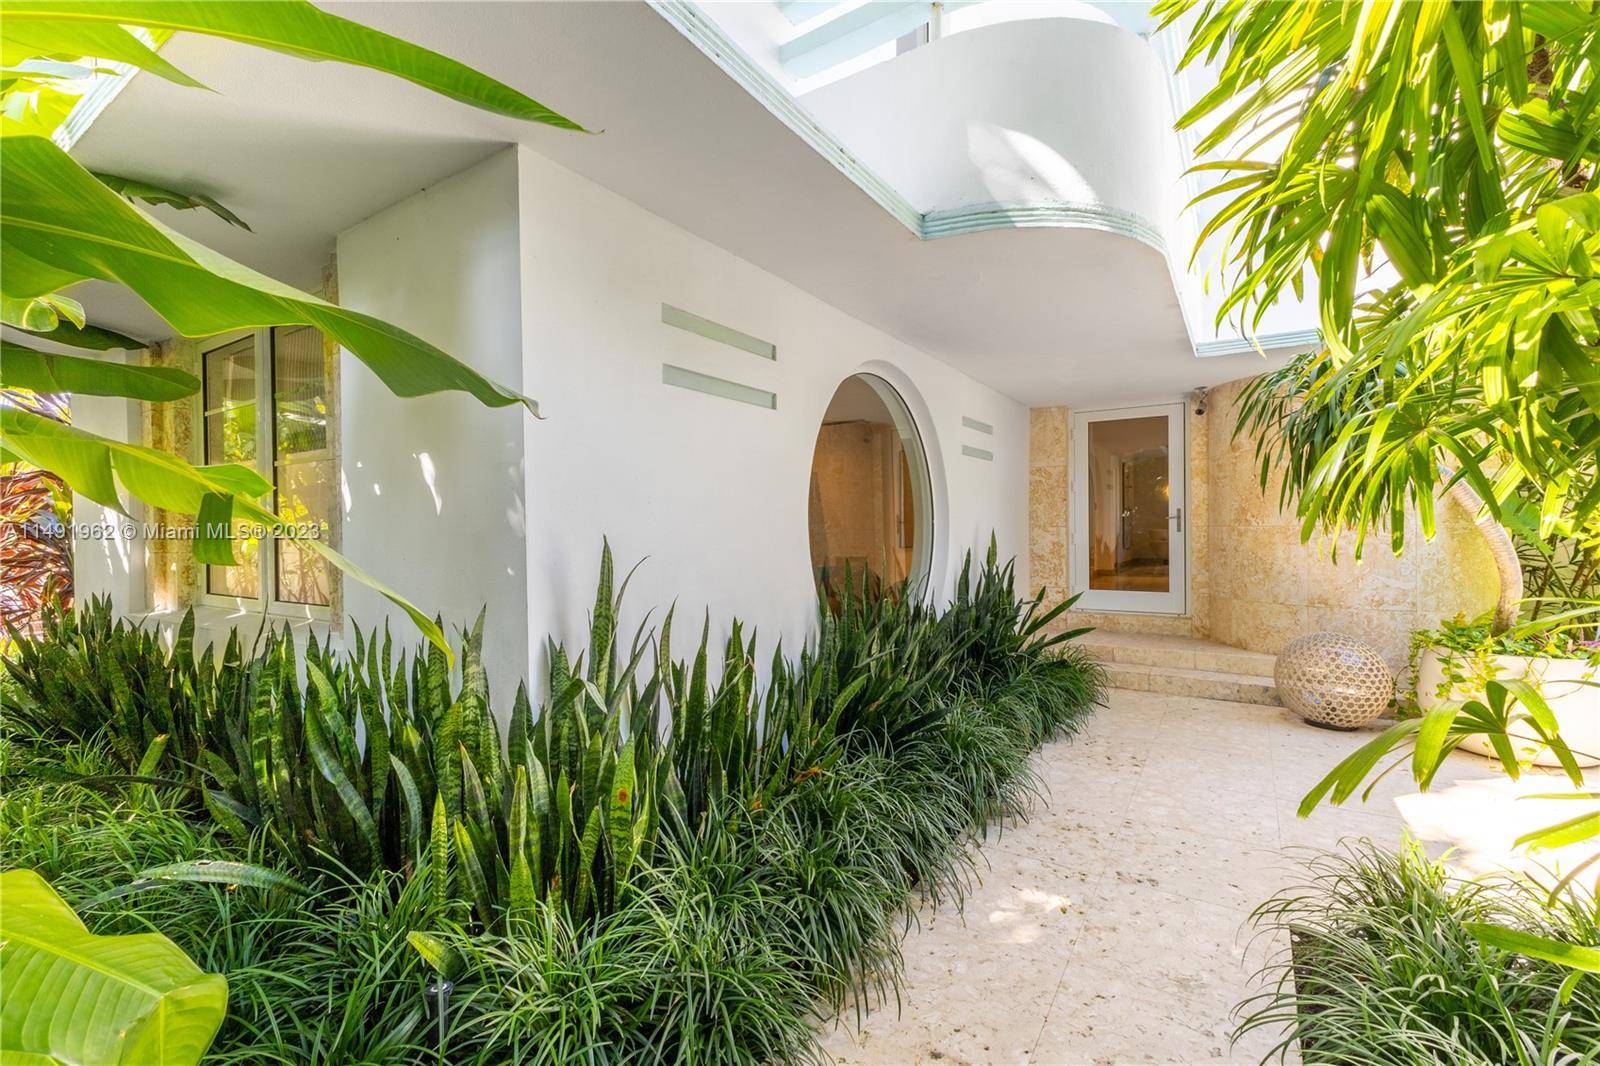 One of a kind rare opportunity to own a spectacular 1936 art deco gem originally designed by renowned Architect Martin L.